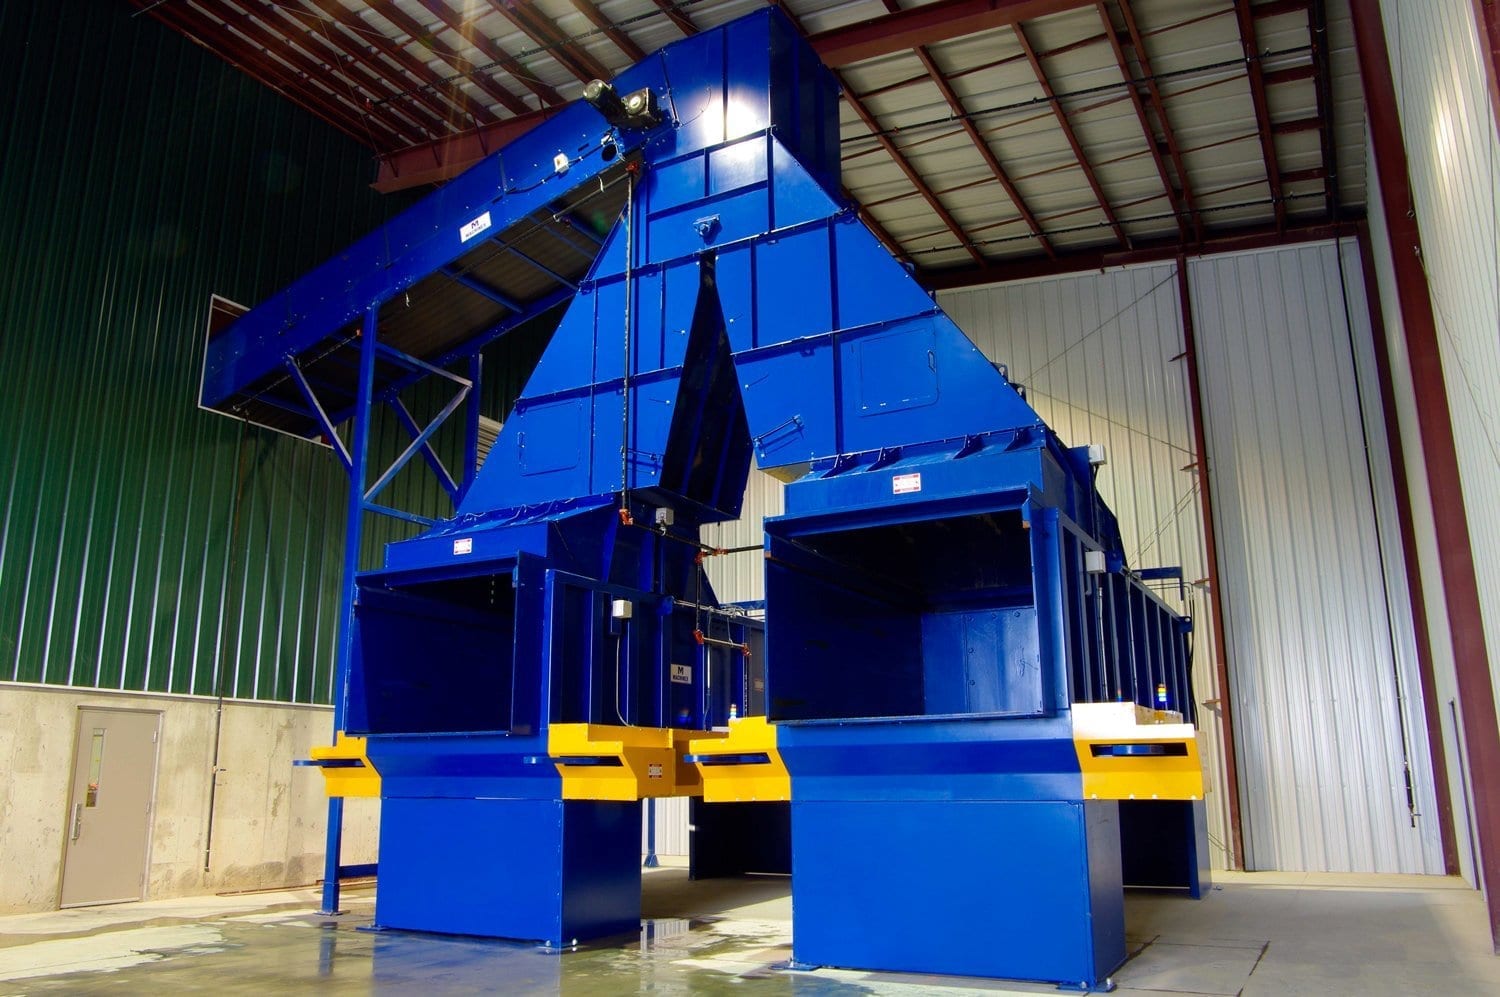 Waste and recycling compactors